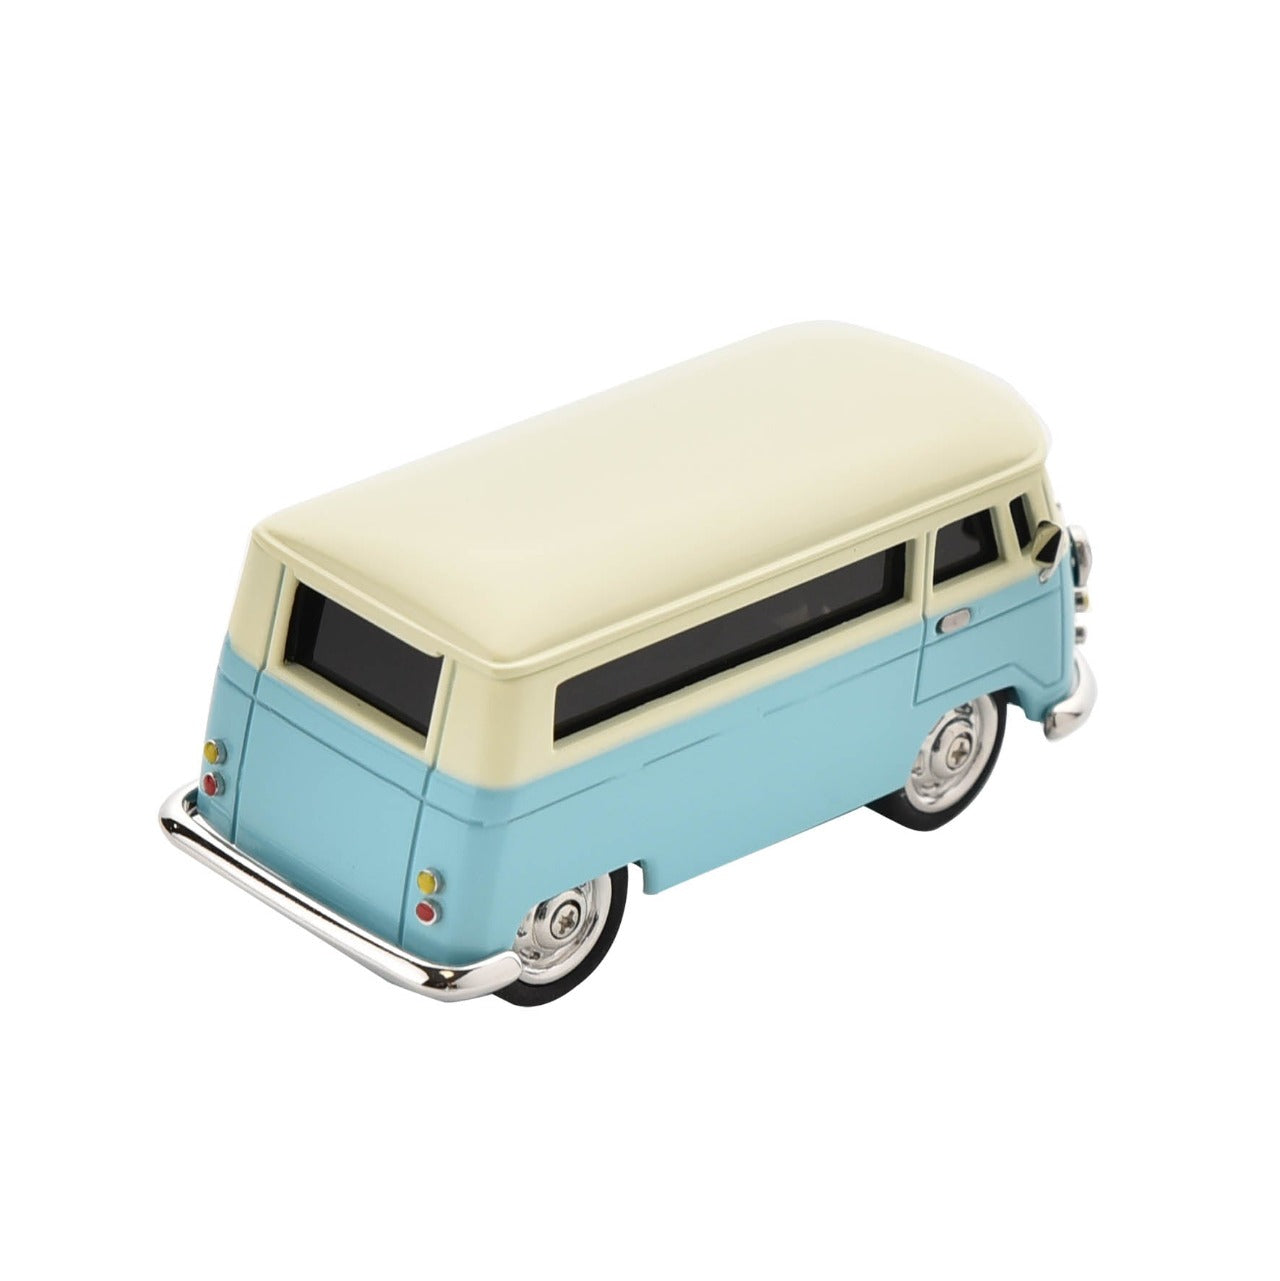 Campervan Miniature Clock Blue  A vintage campervan miniature clock from WILLIAM WIDDOP®.  Bring a uniquely refreshing touch to the home with this stylish miniature clock that makes for a great gift for anyone who is a fan of sports cars.